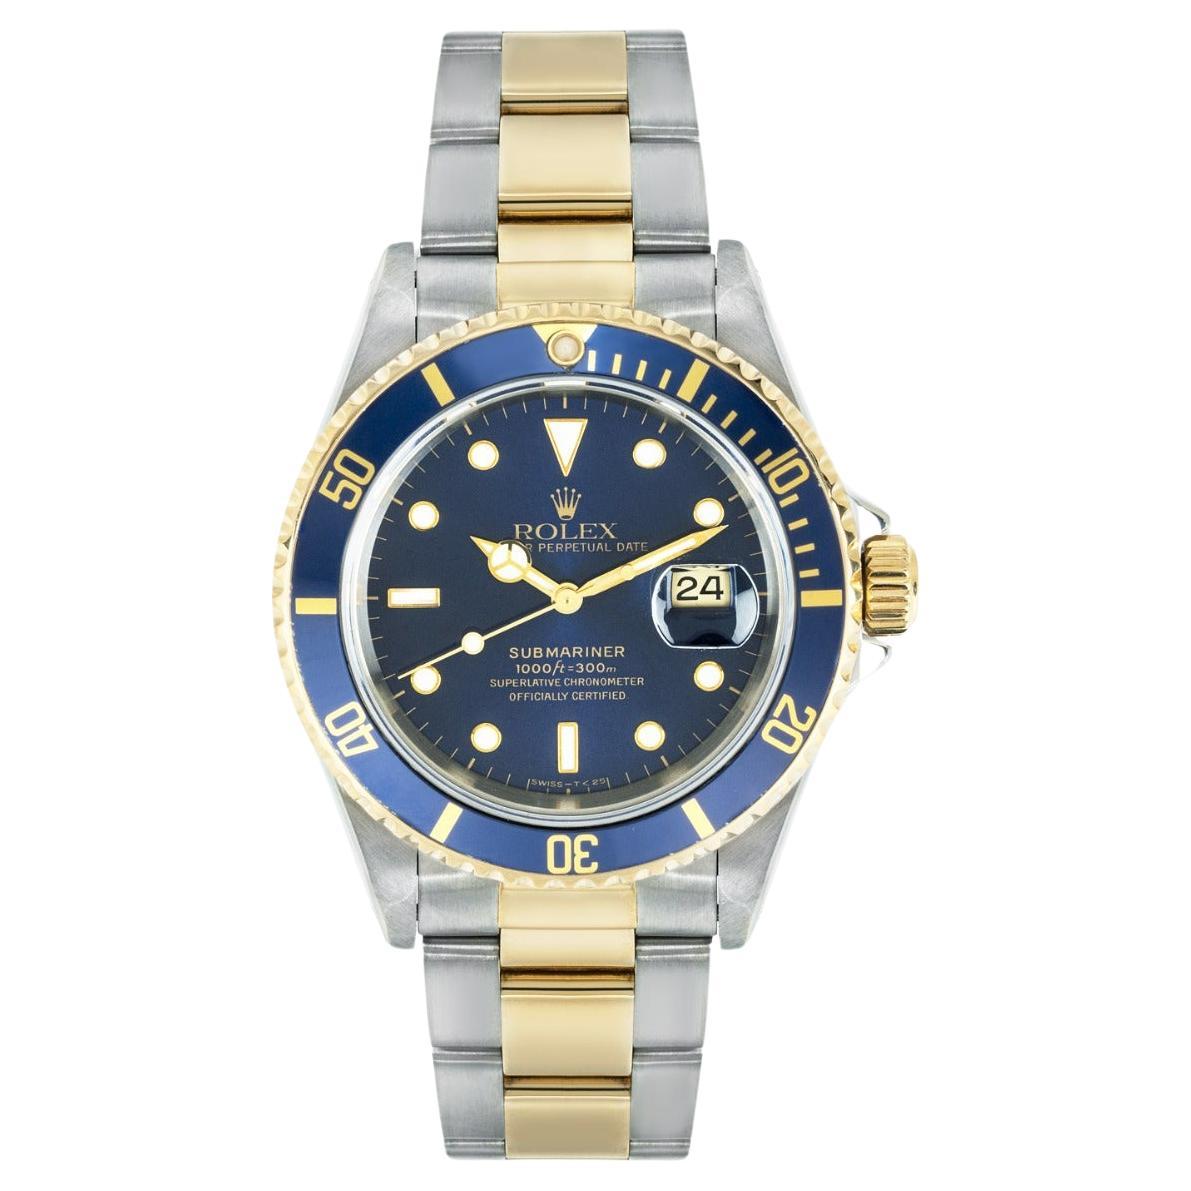 Which Rolex will go up in value?